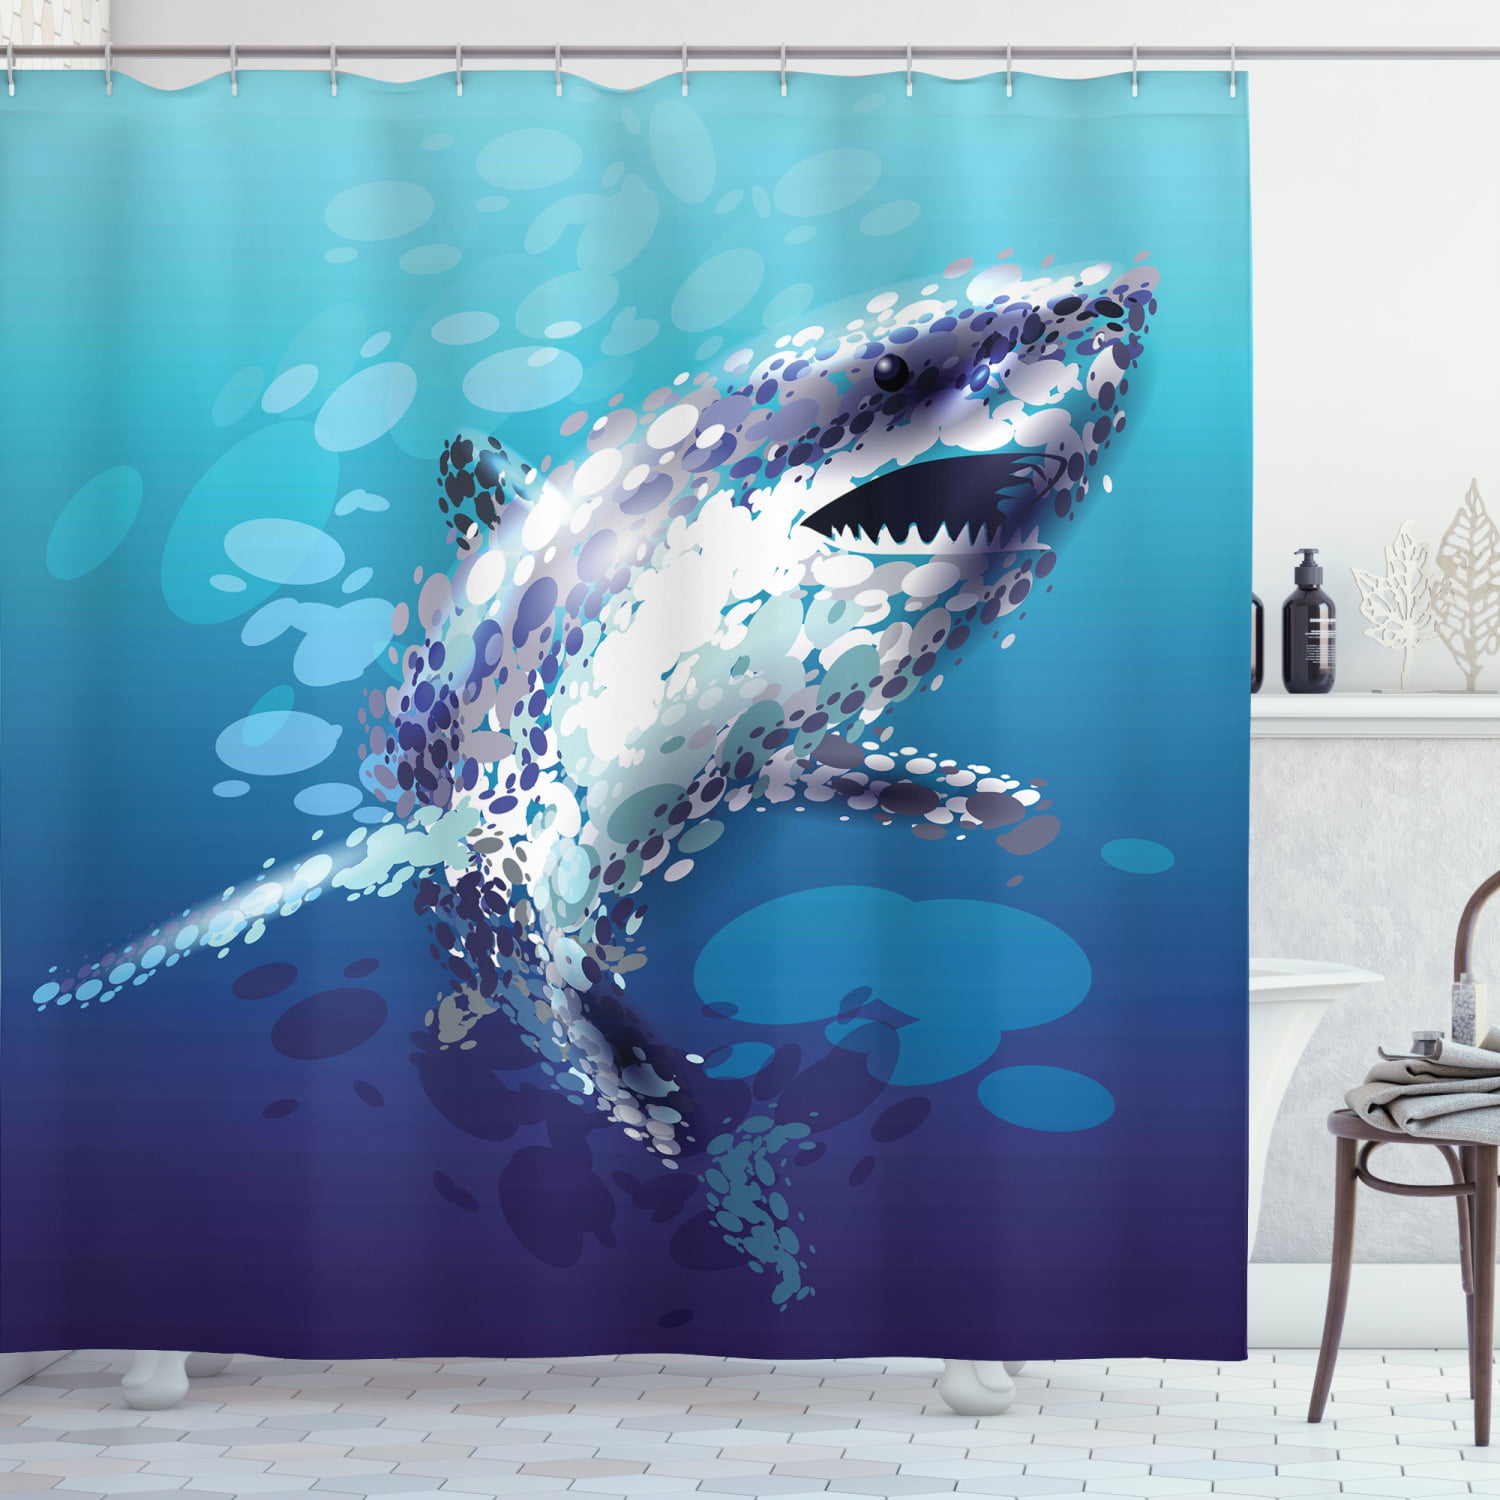 Details about   Shark Shower Curtain Exotic Dreamy Ocean Life Print for Bathroom 